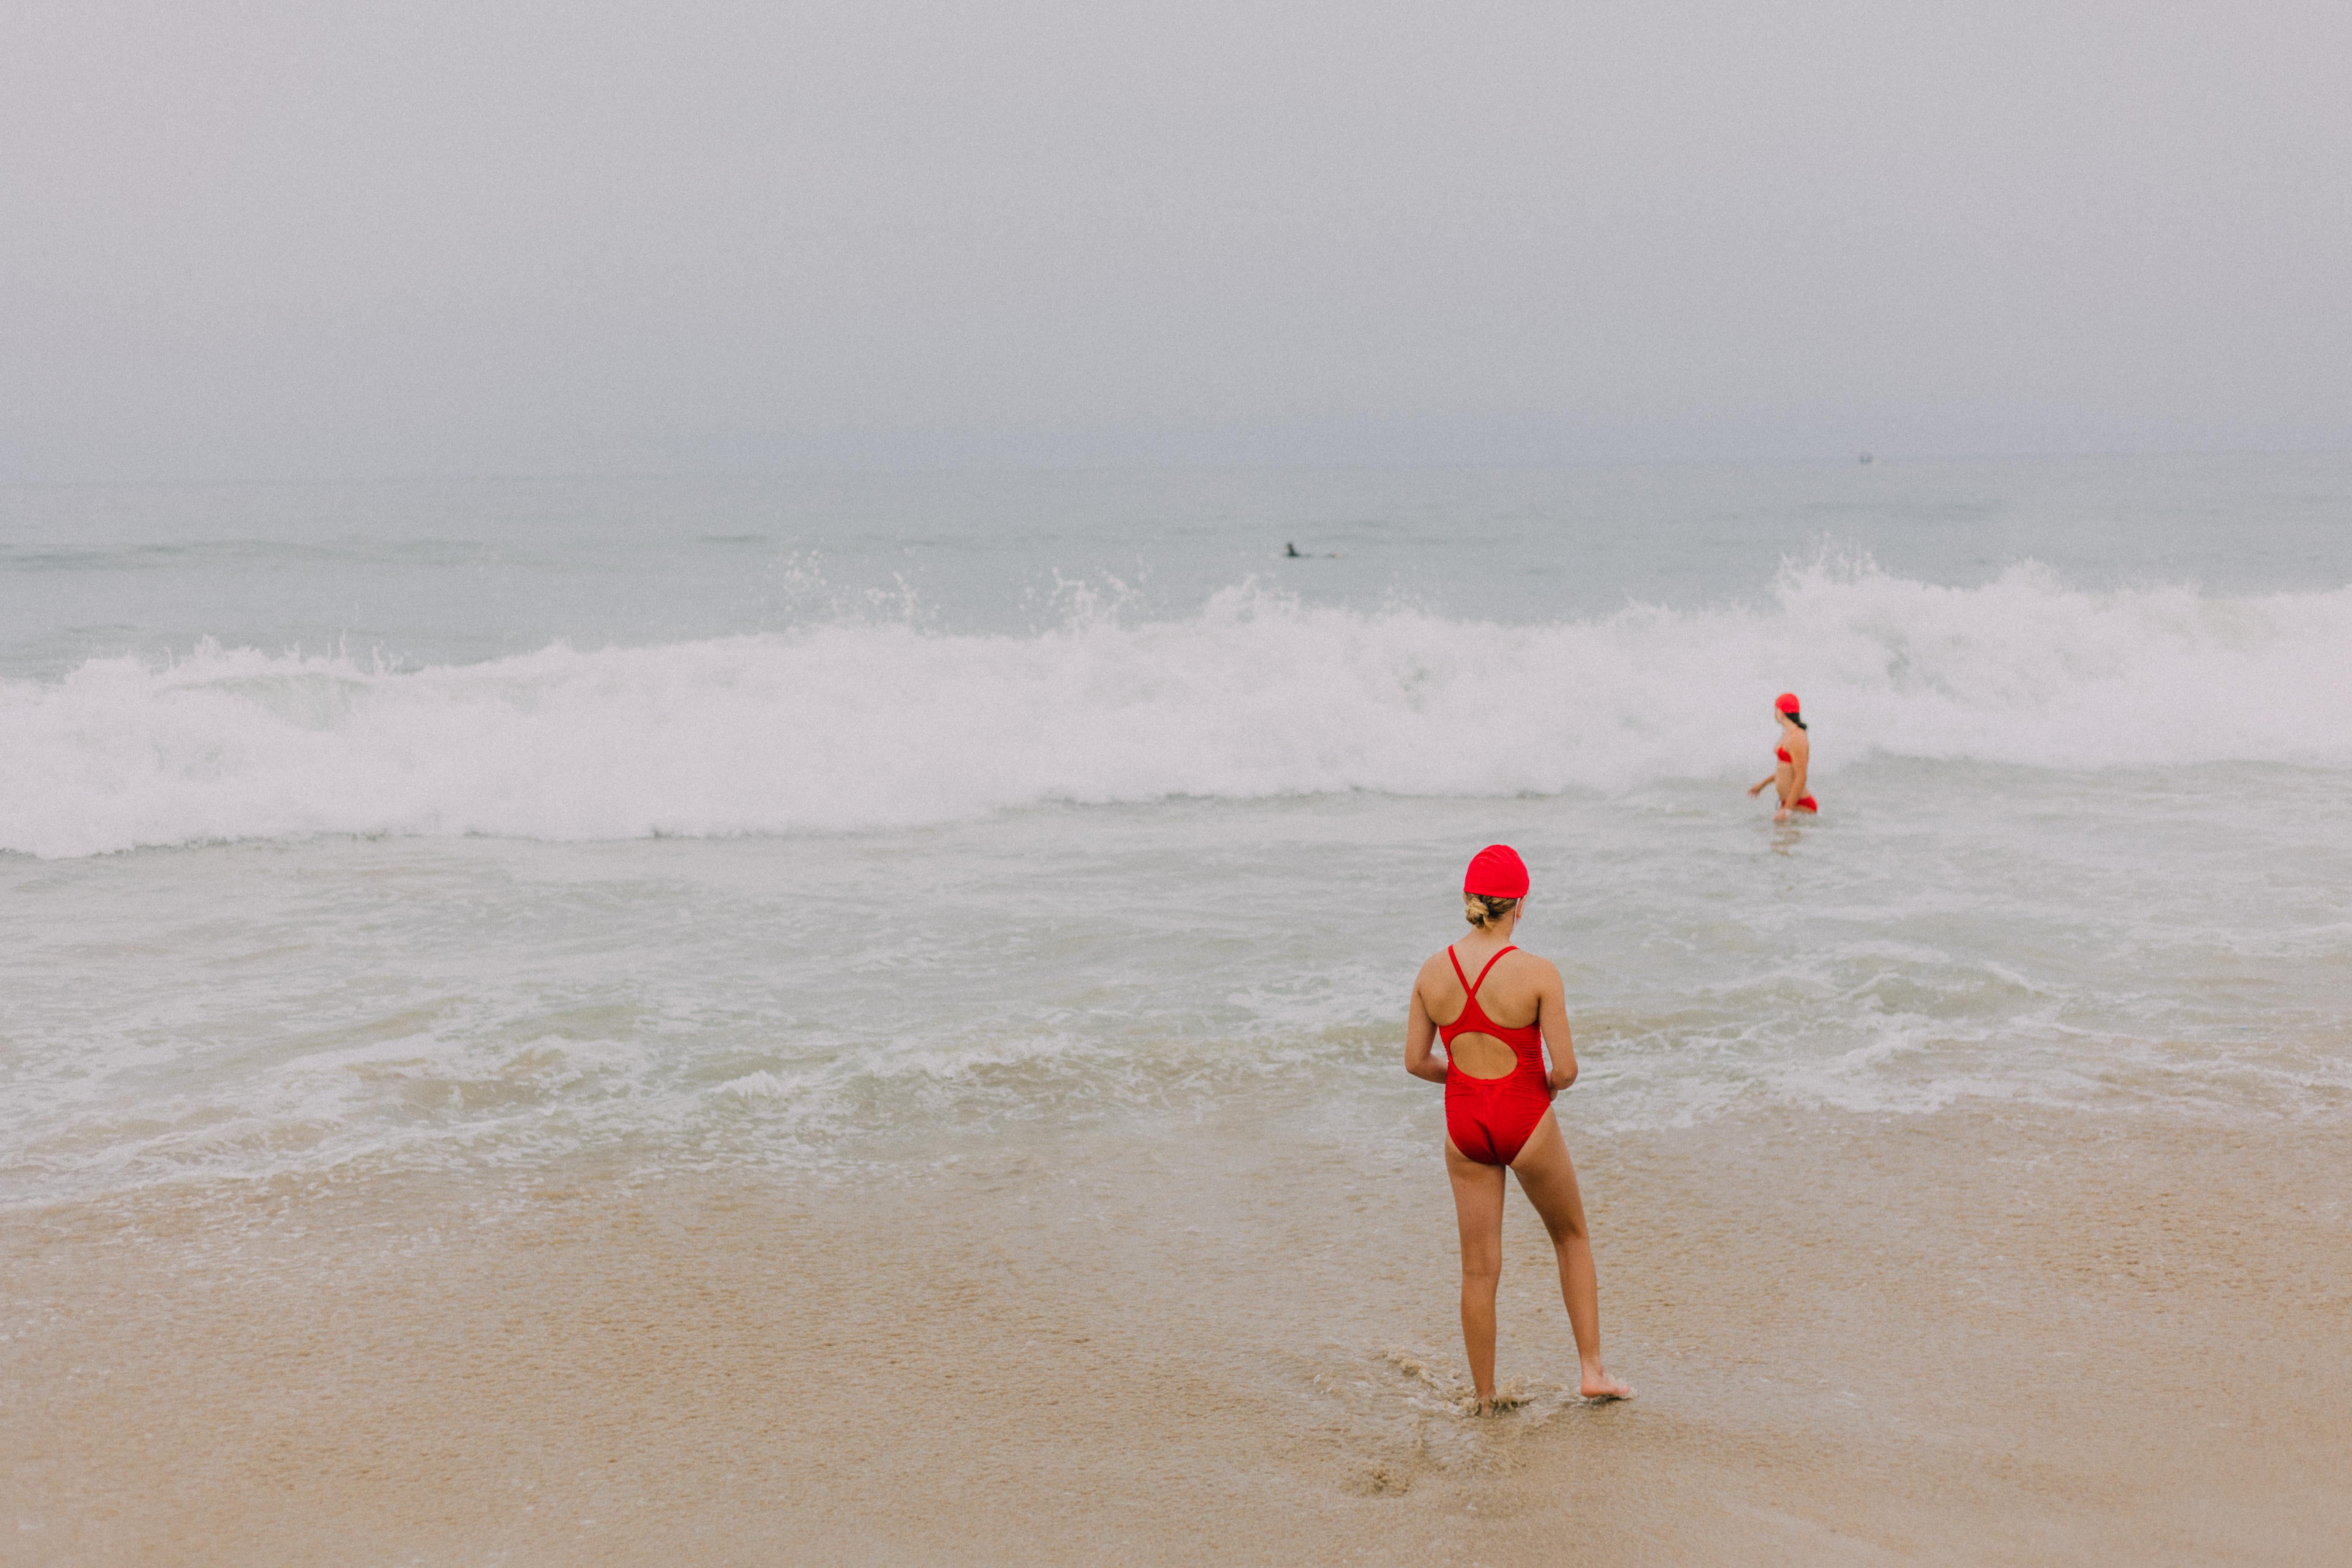 David Pugh Figurative Photograph - Swimming Lessons (Beach, Bathing Suite, Red Cap, Waves, Baywatch)